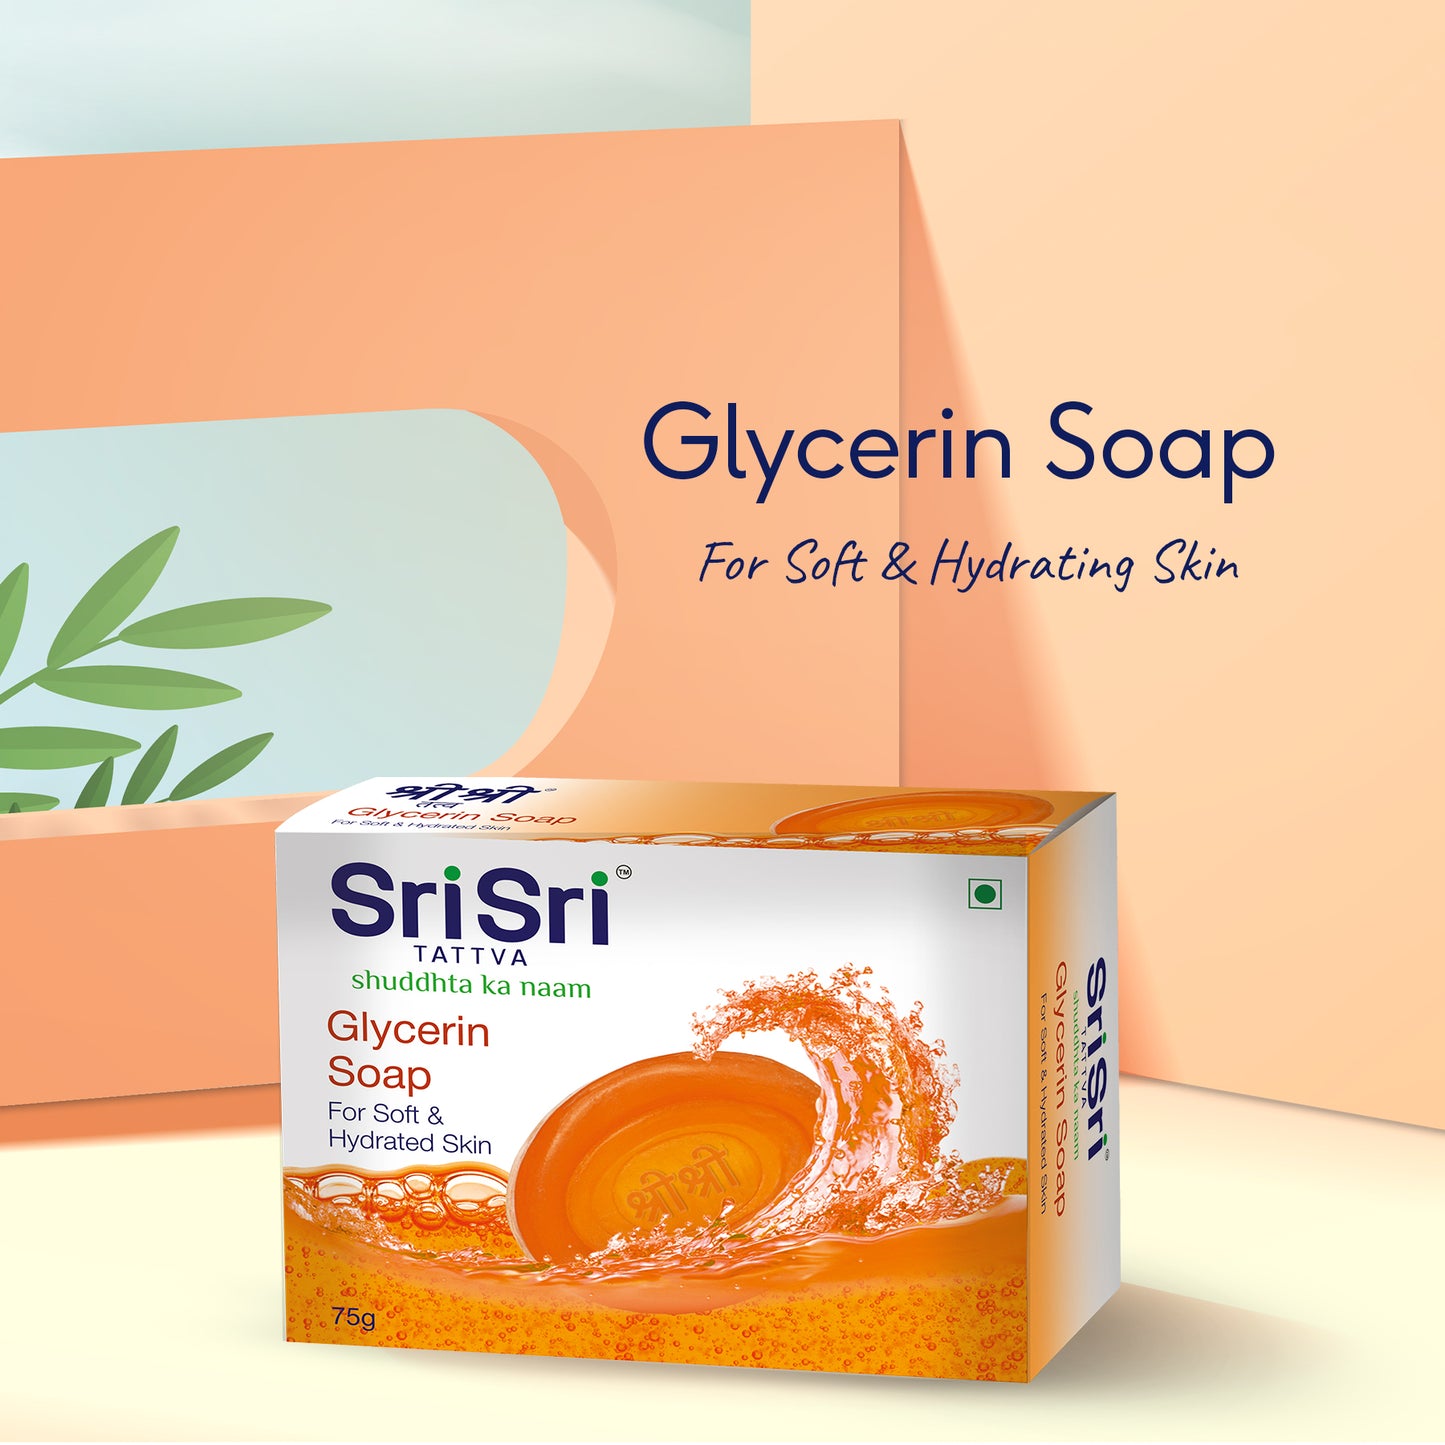 Glycerin Soap - For Soft & Hydrated Skin, 75 g